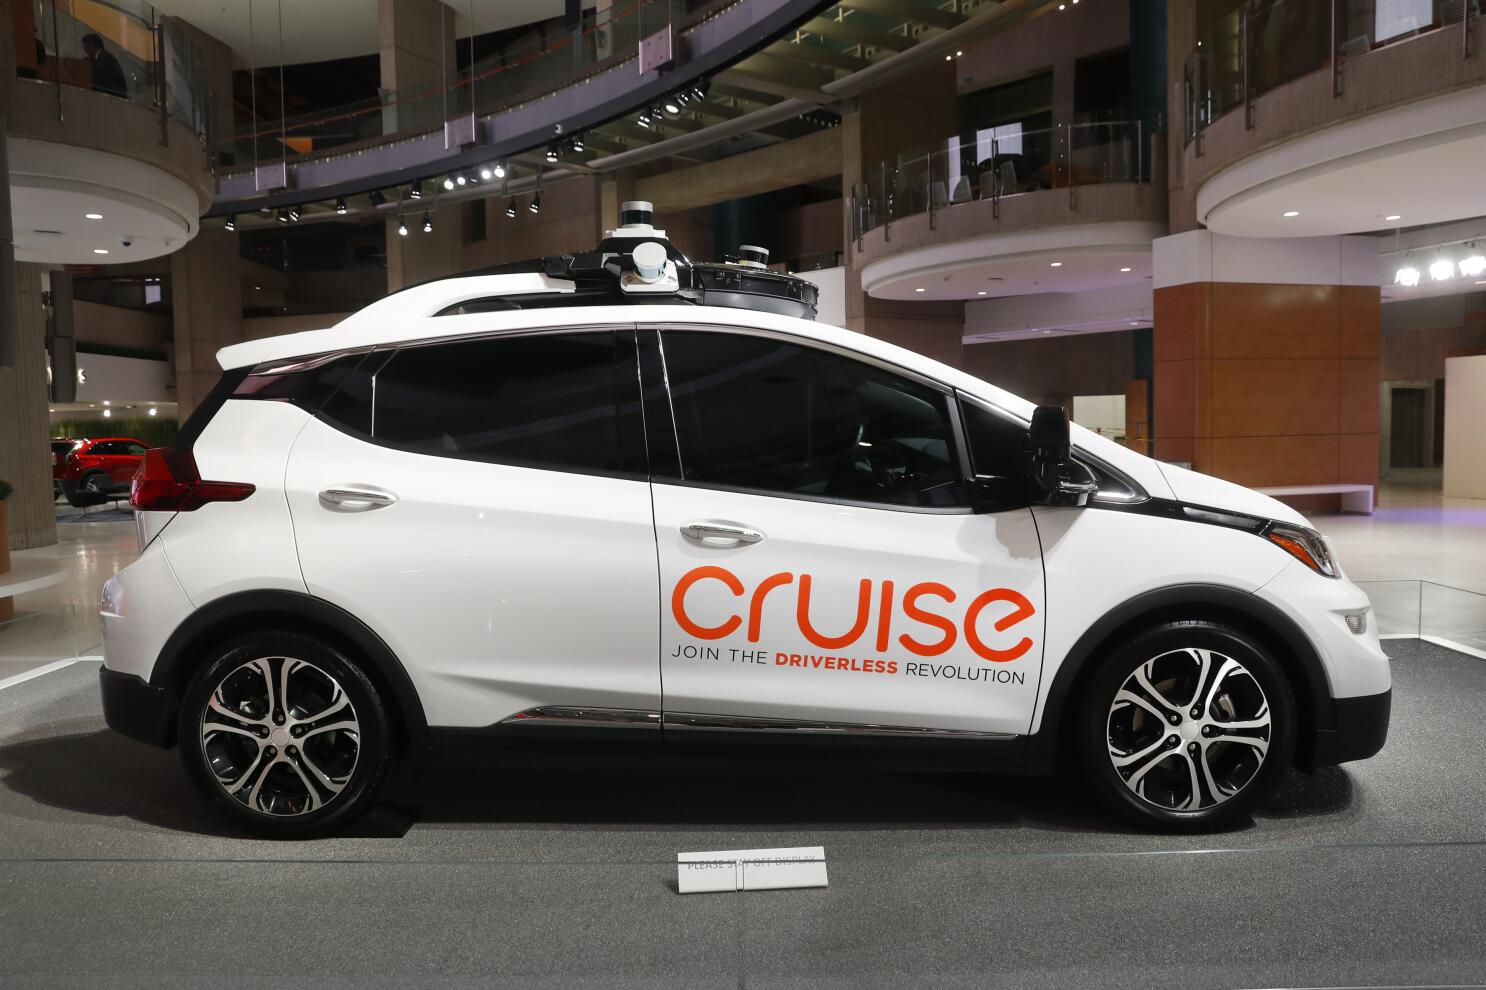 California pulls permits for Cruise's driverless cars over safety concerns  - Los Angeles Times